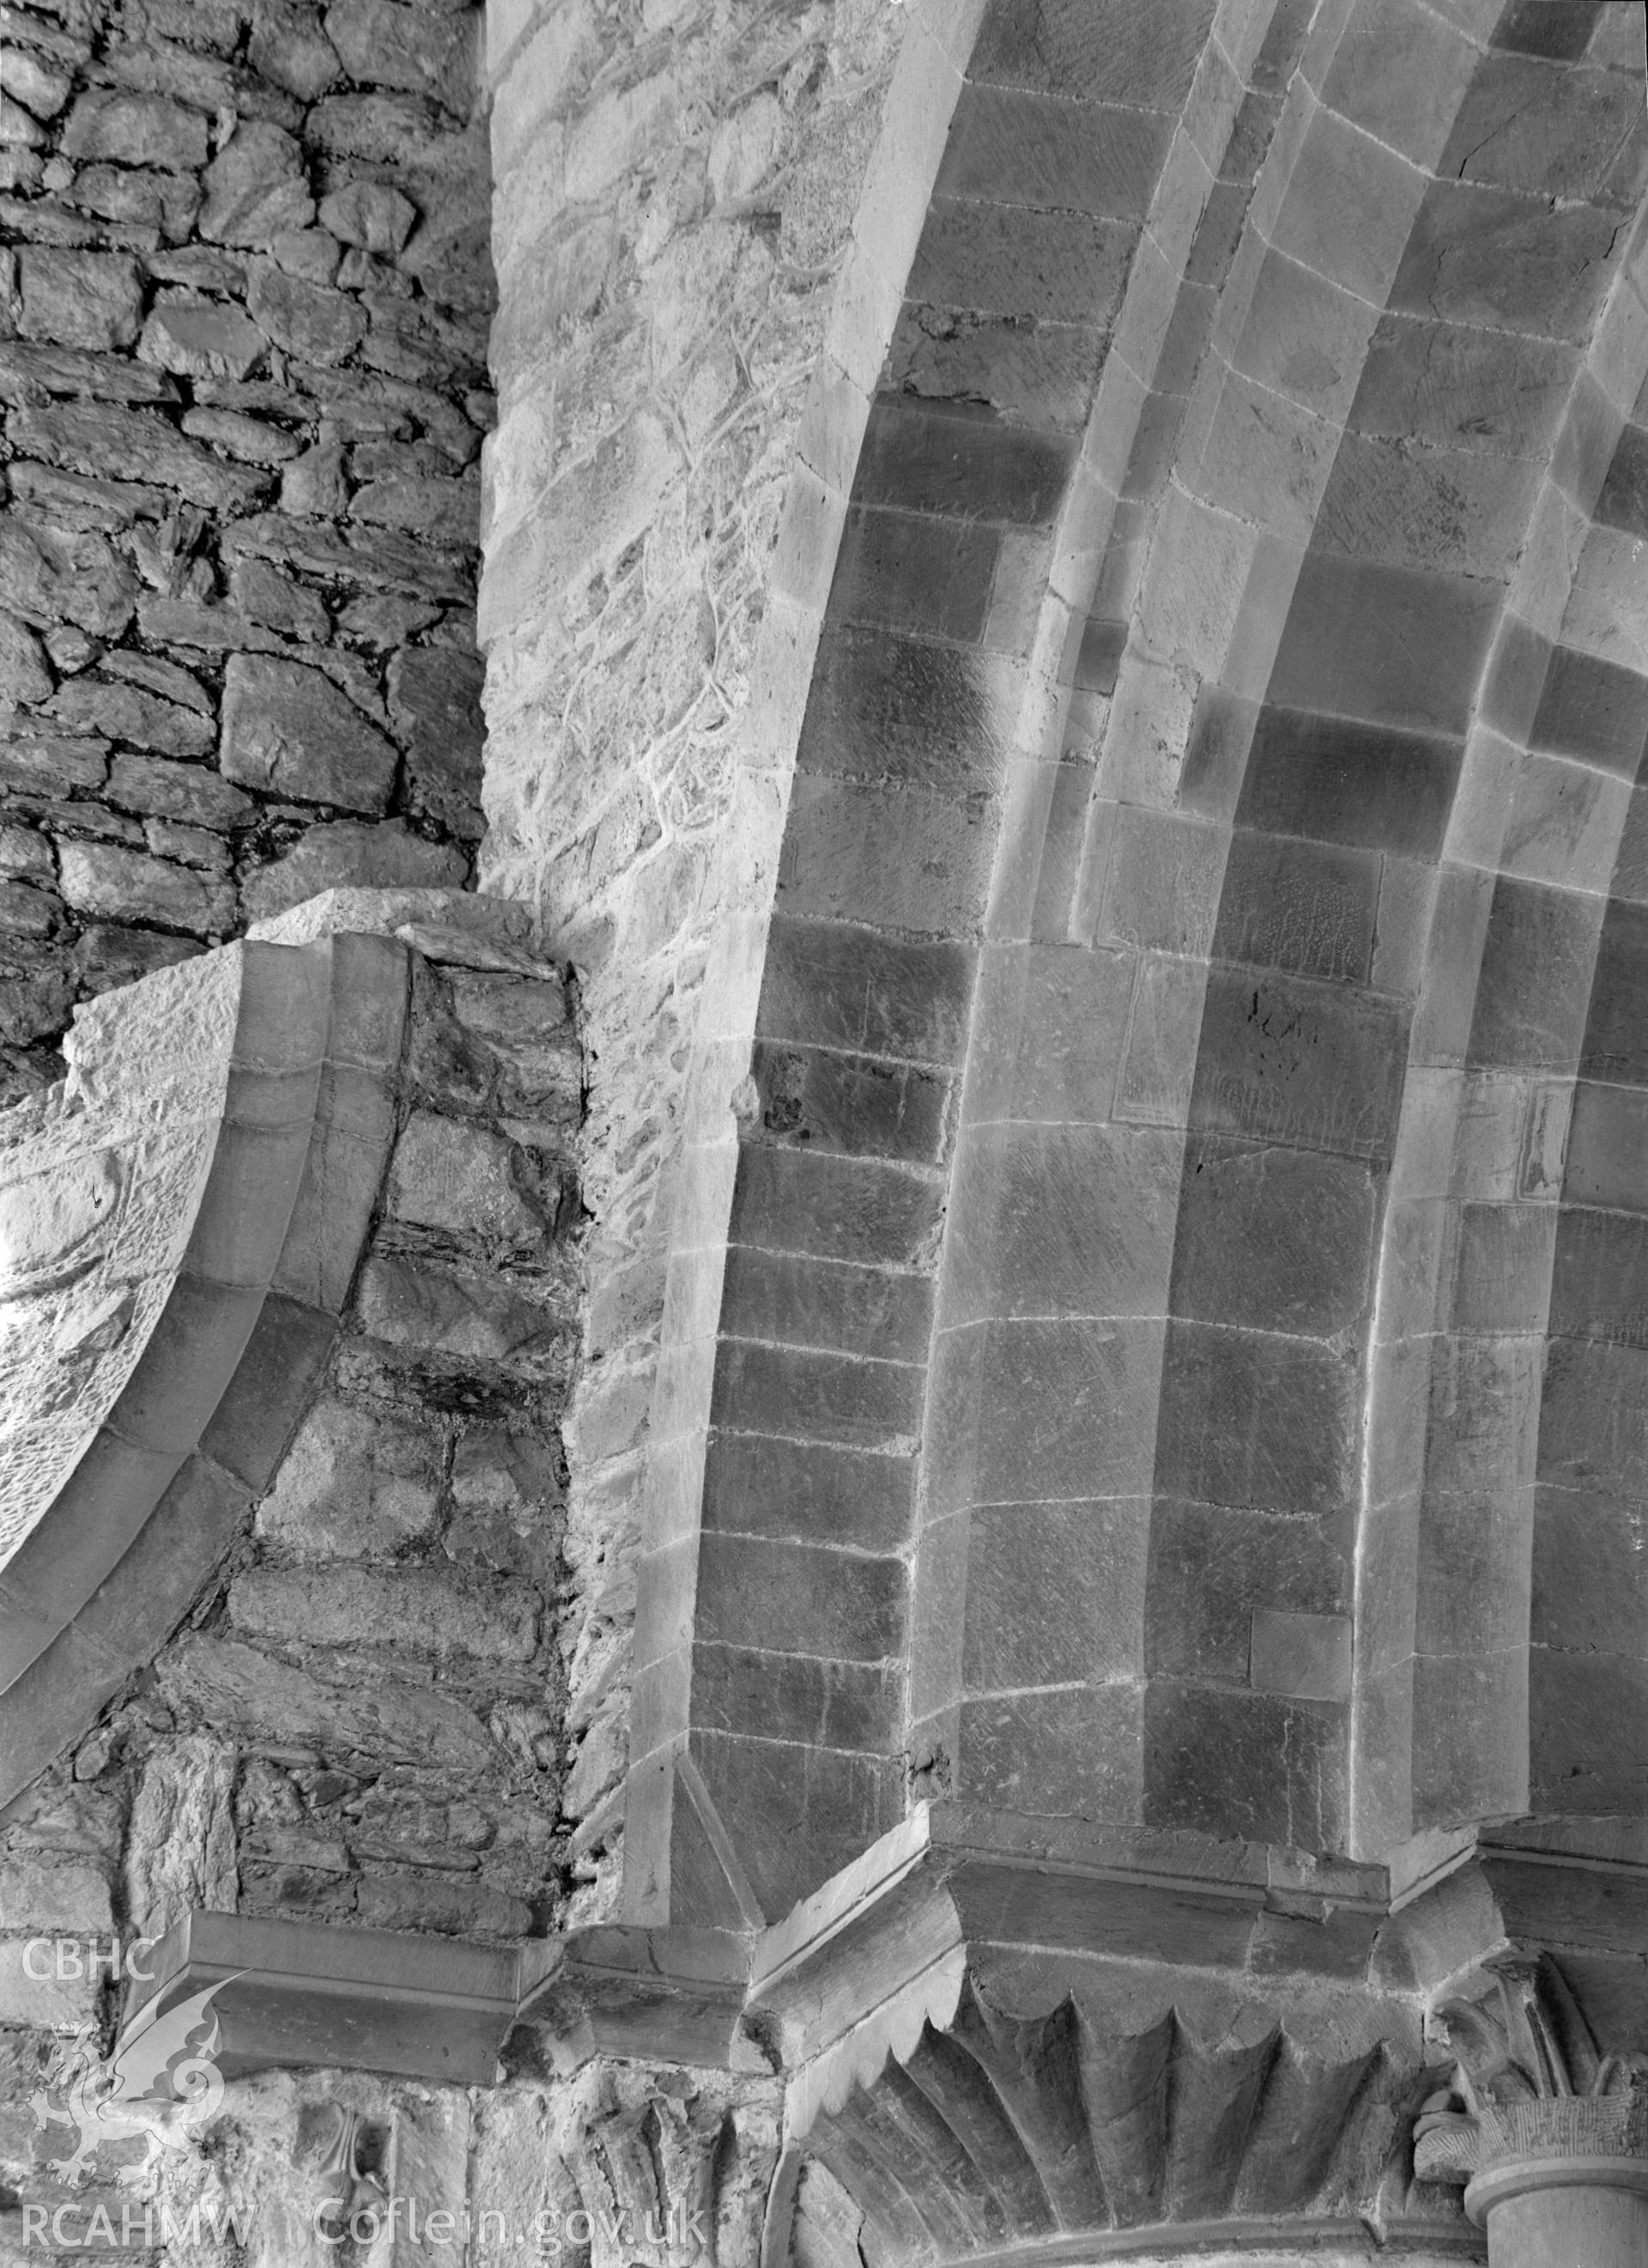 Digital copy of a black and white nitrate negative showing detail view of archway at St. David's Cathedral, taken by E.W. Lovegrove, July 1936